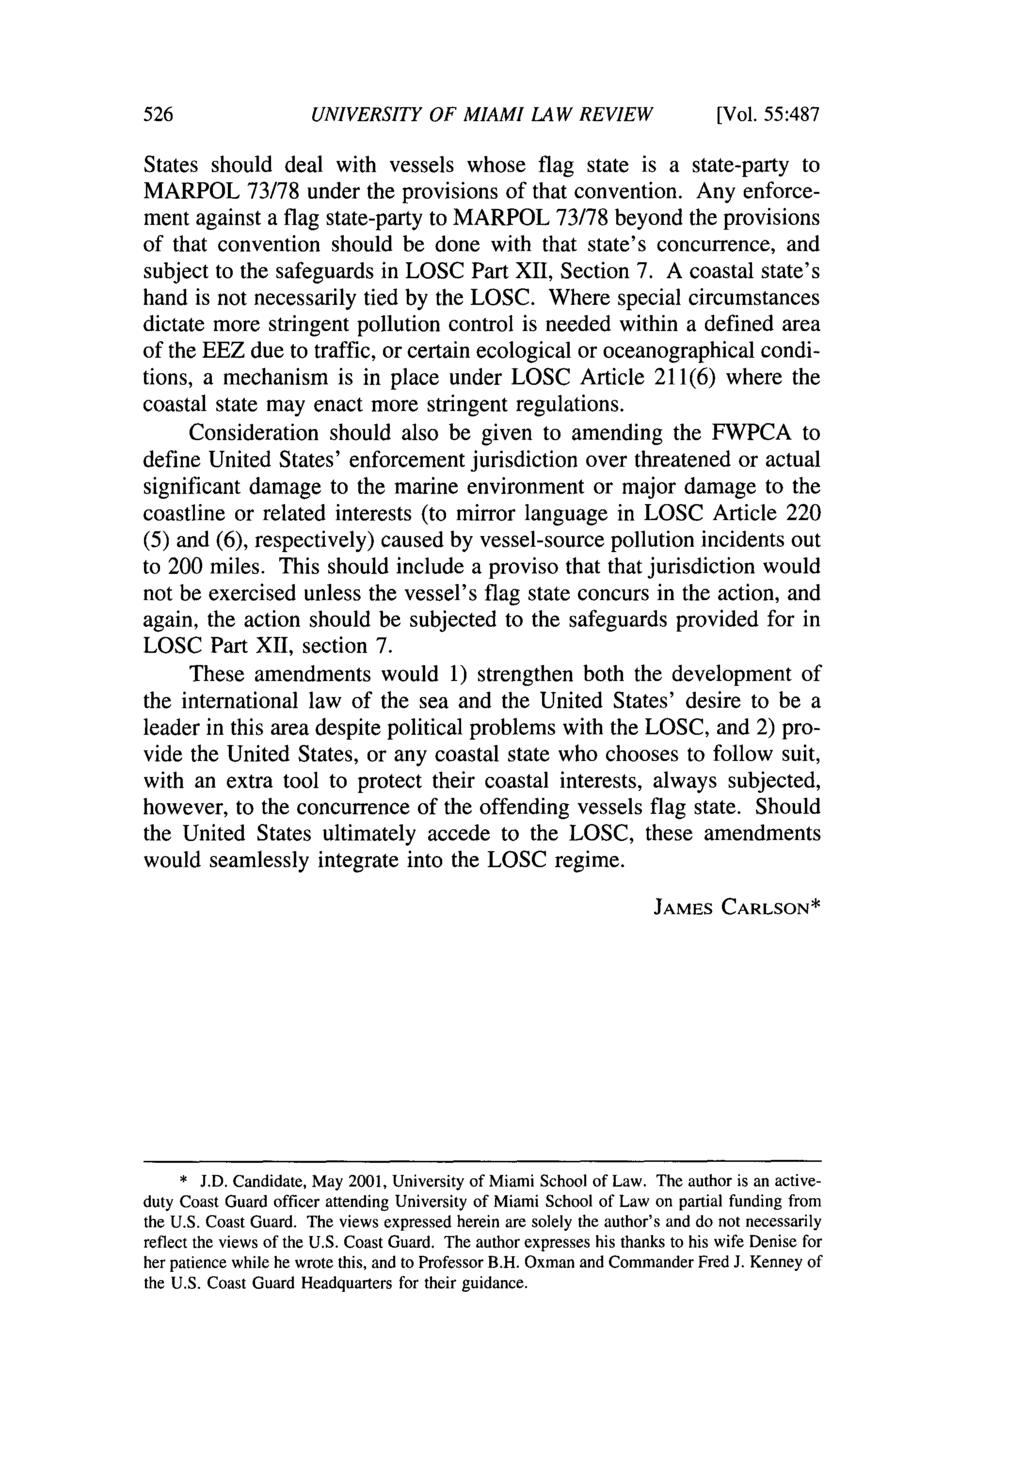 UNIVERSITY OF MIAMI LAW REVIEW [Vol. 55:487 States should deal with vessels whose flag state is a state-party to MARPOL 73/78 under the provisions of that convention.